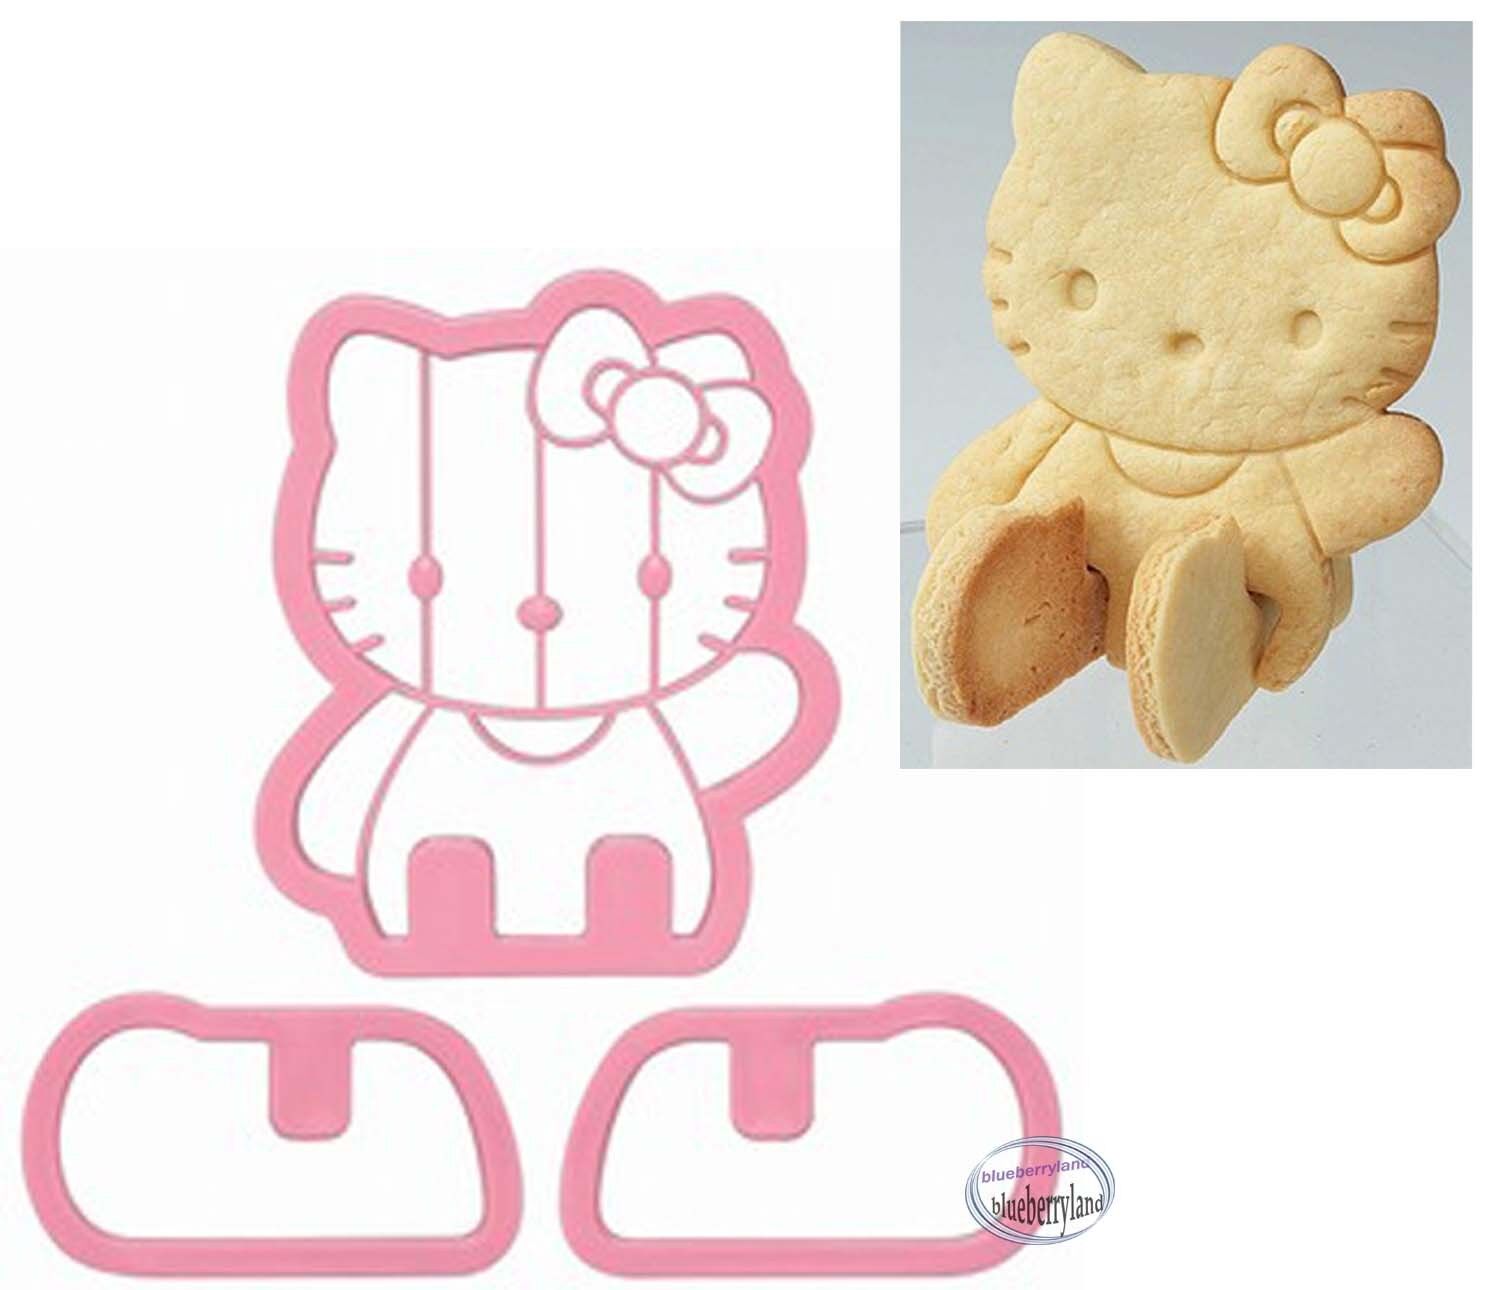 Sanrio Hello Kitty 3D Cookie MOLD Sandwich Stamp Cutters mould cookies kitchen